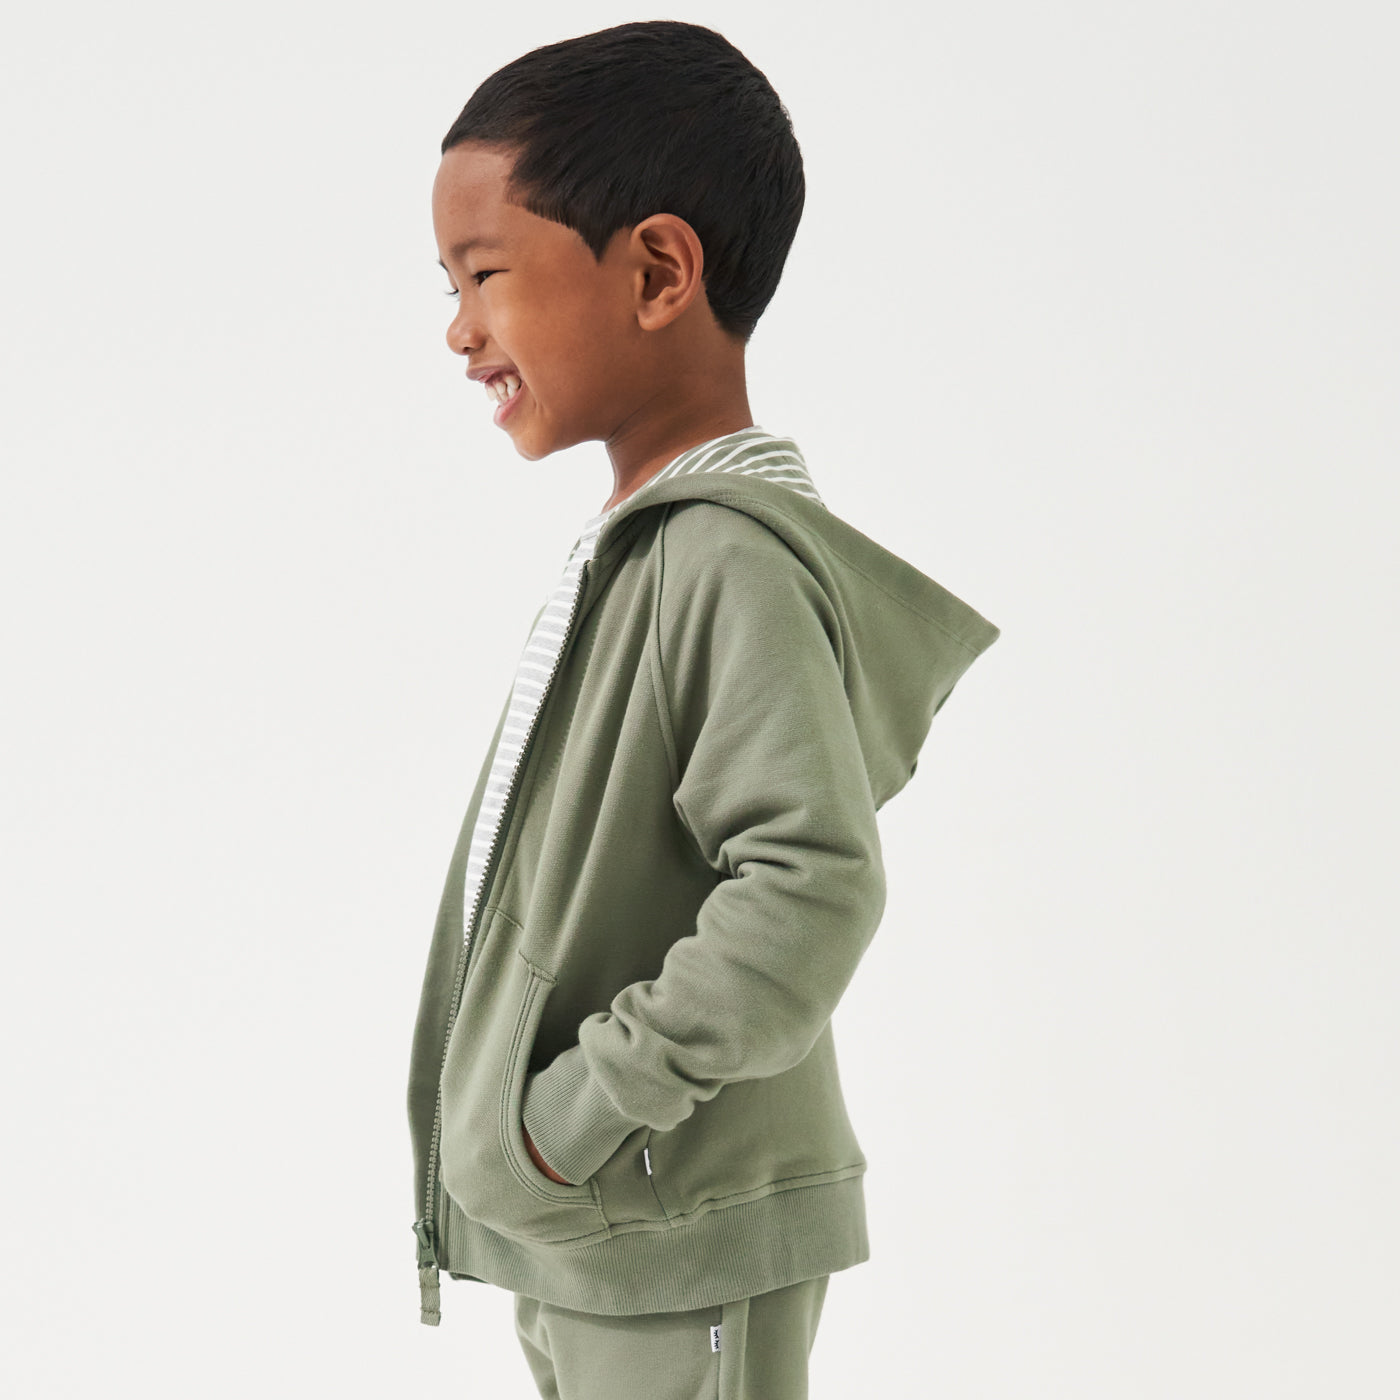 Side view image of a child wearing a Moss zip hoodie